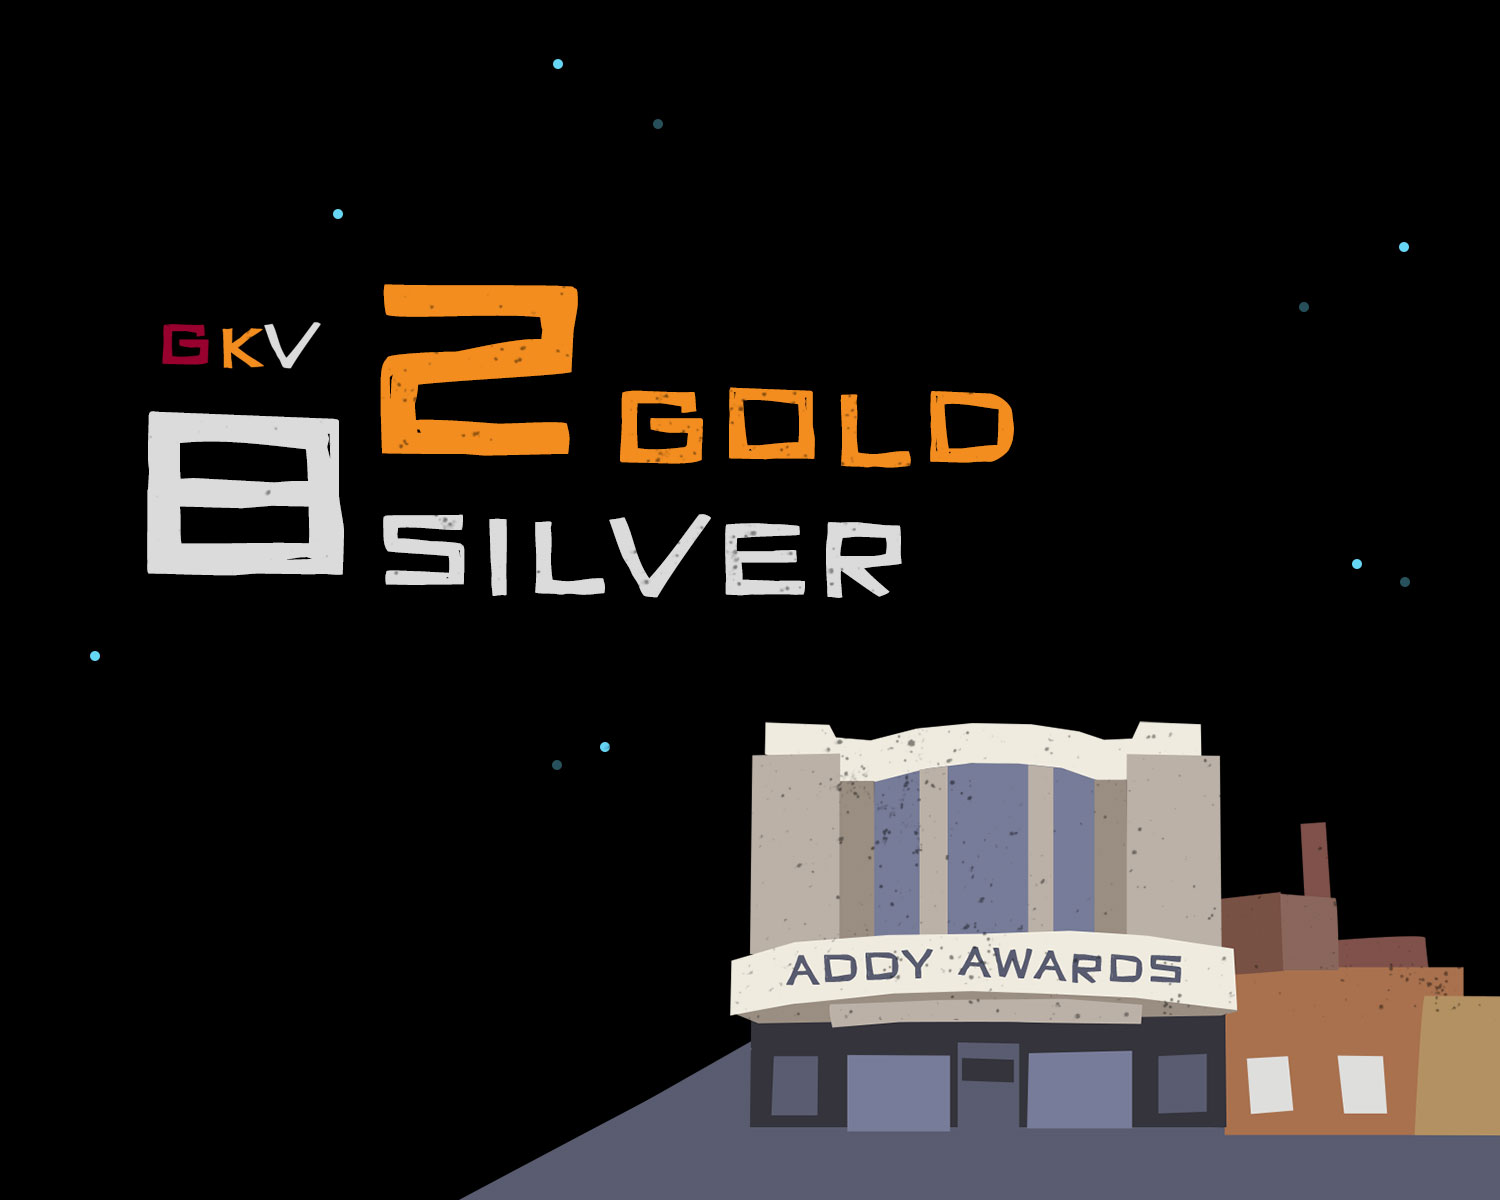 GKV Takes Home Gold and Silver ADDYs - GKV